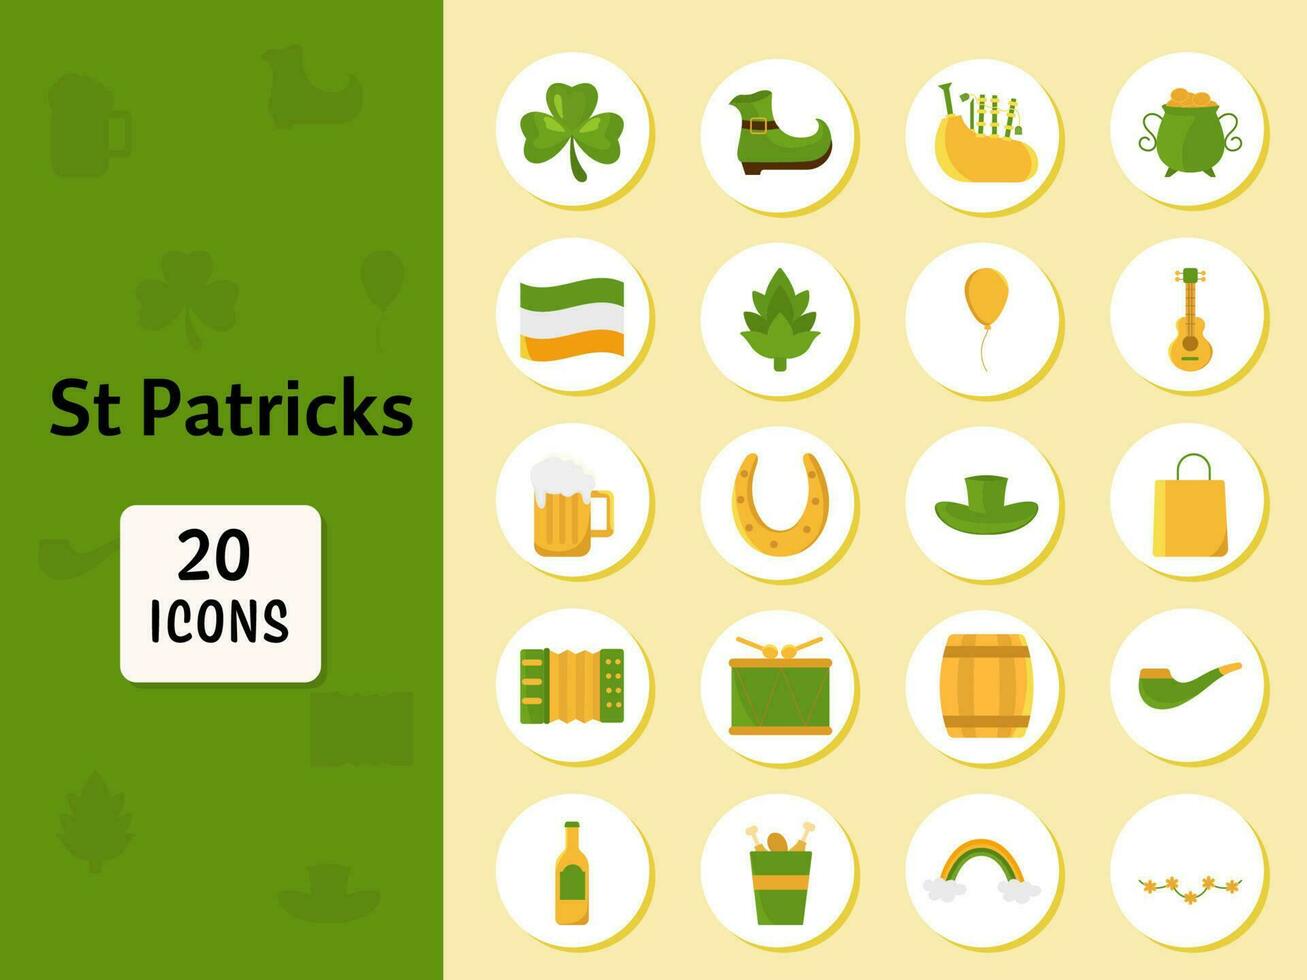 Illustration Of Saint Patrick's Day Icon Set In Flat Style. vector